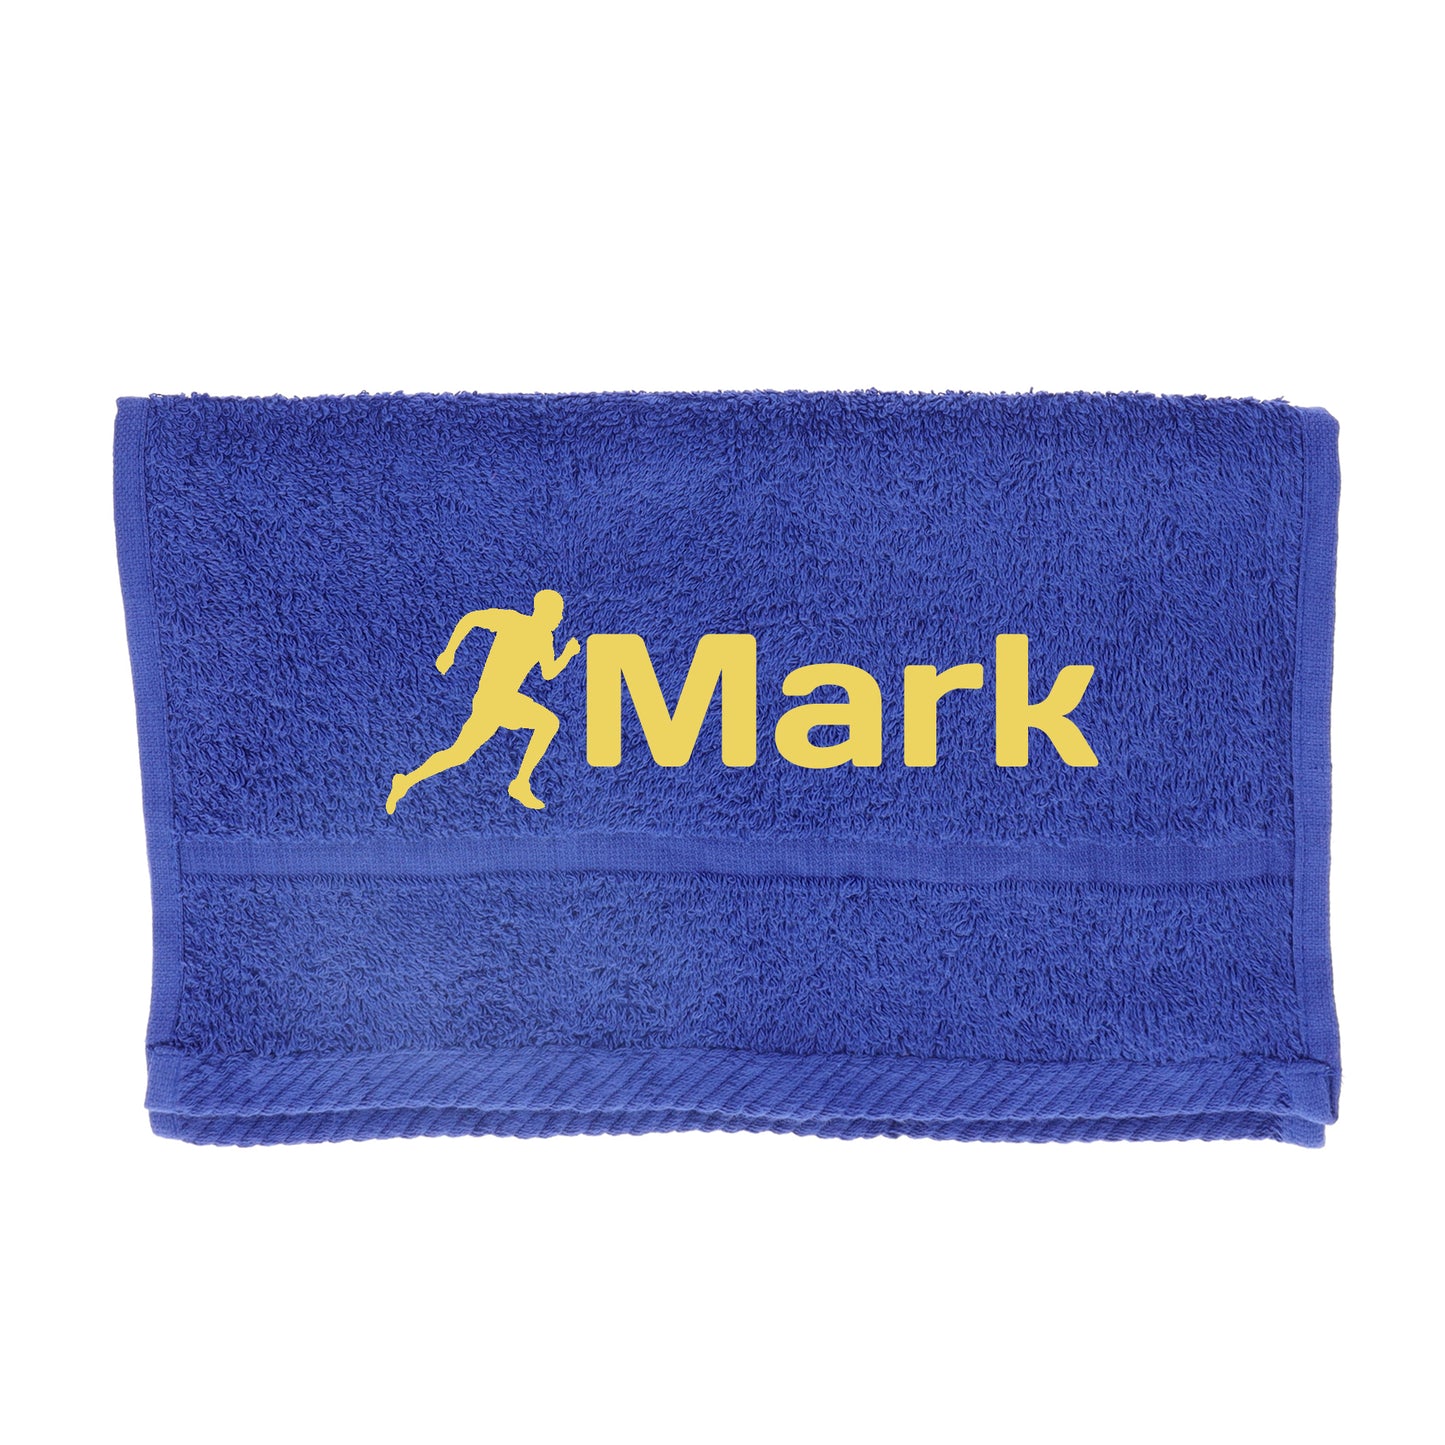 Personalised Embroidered Gym Sweat Sports Towel  - Always Looking Good - Royal Blue  